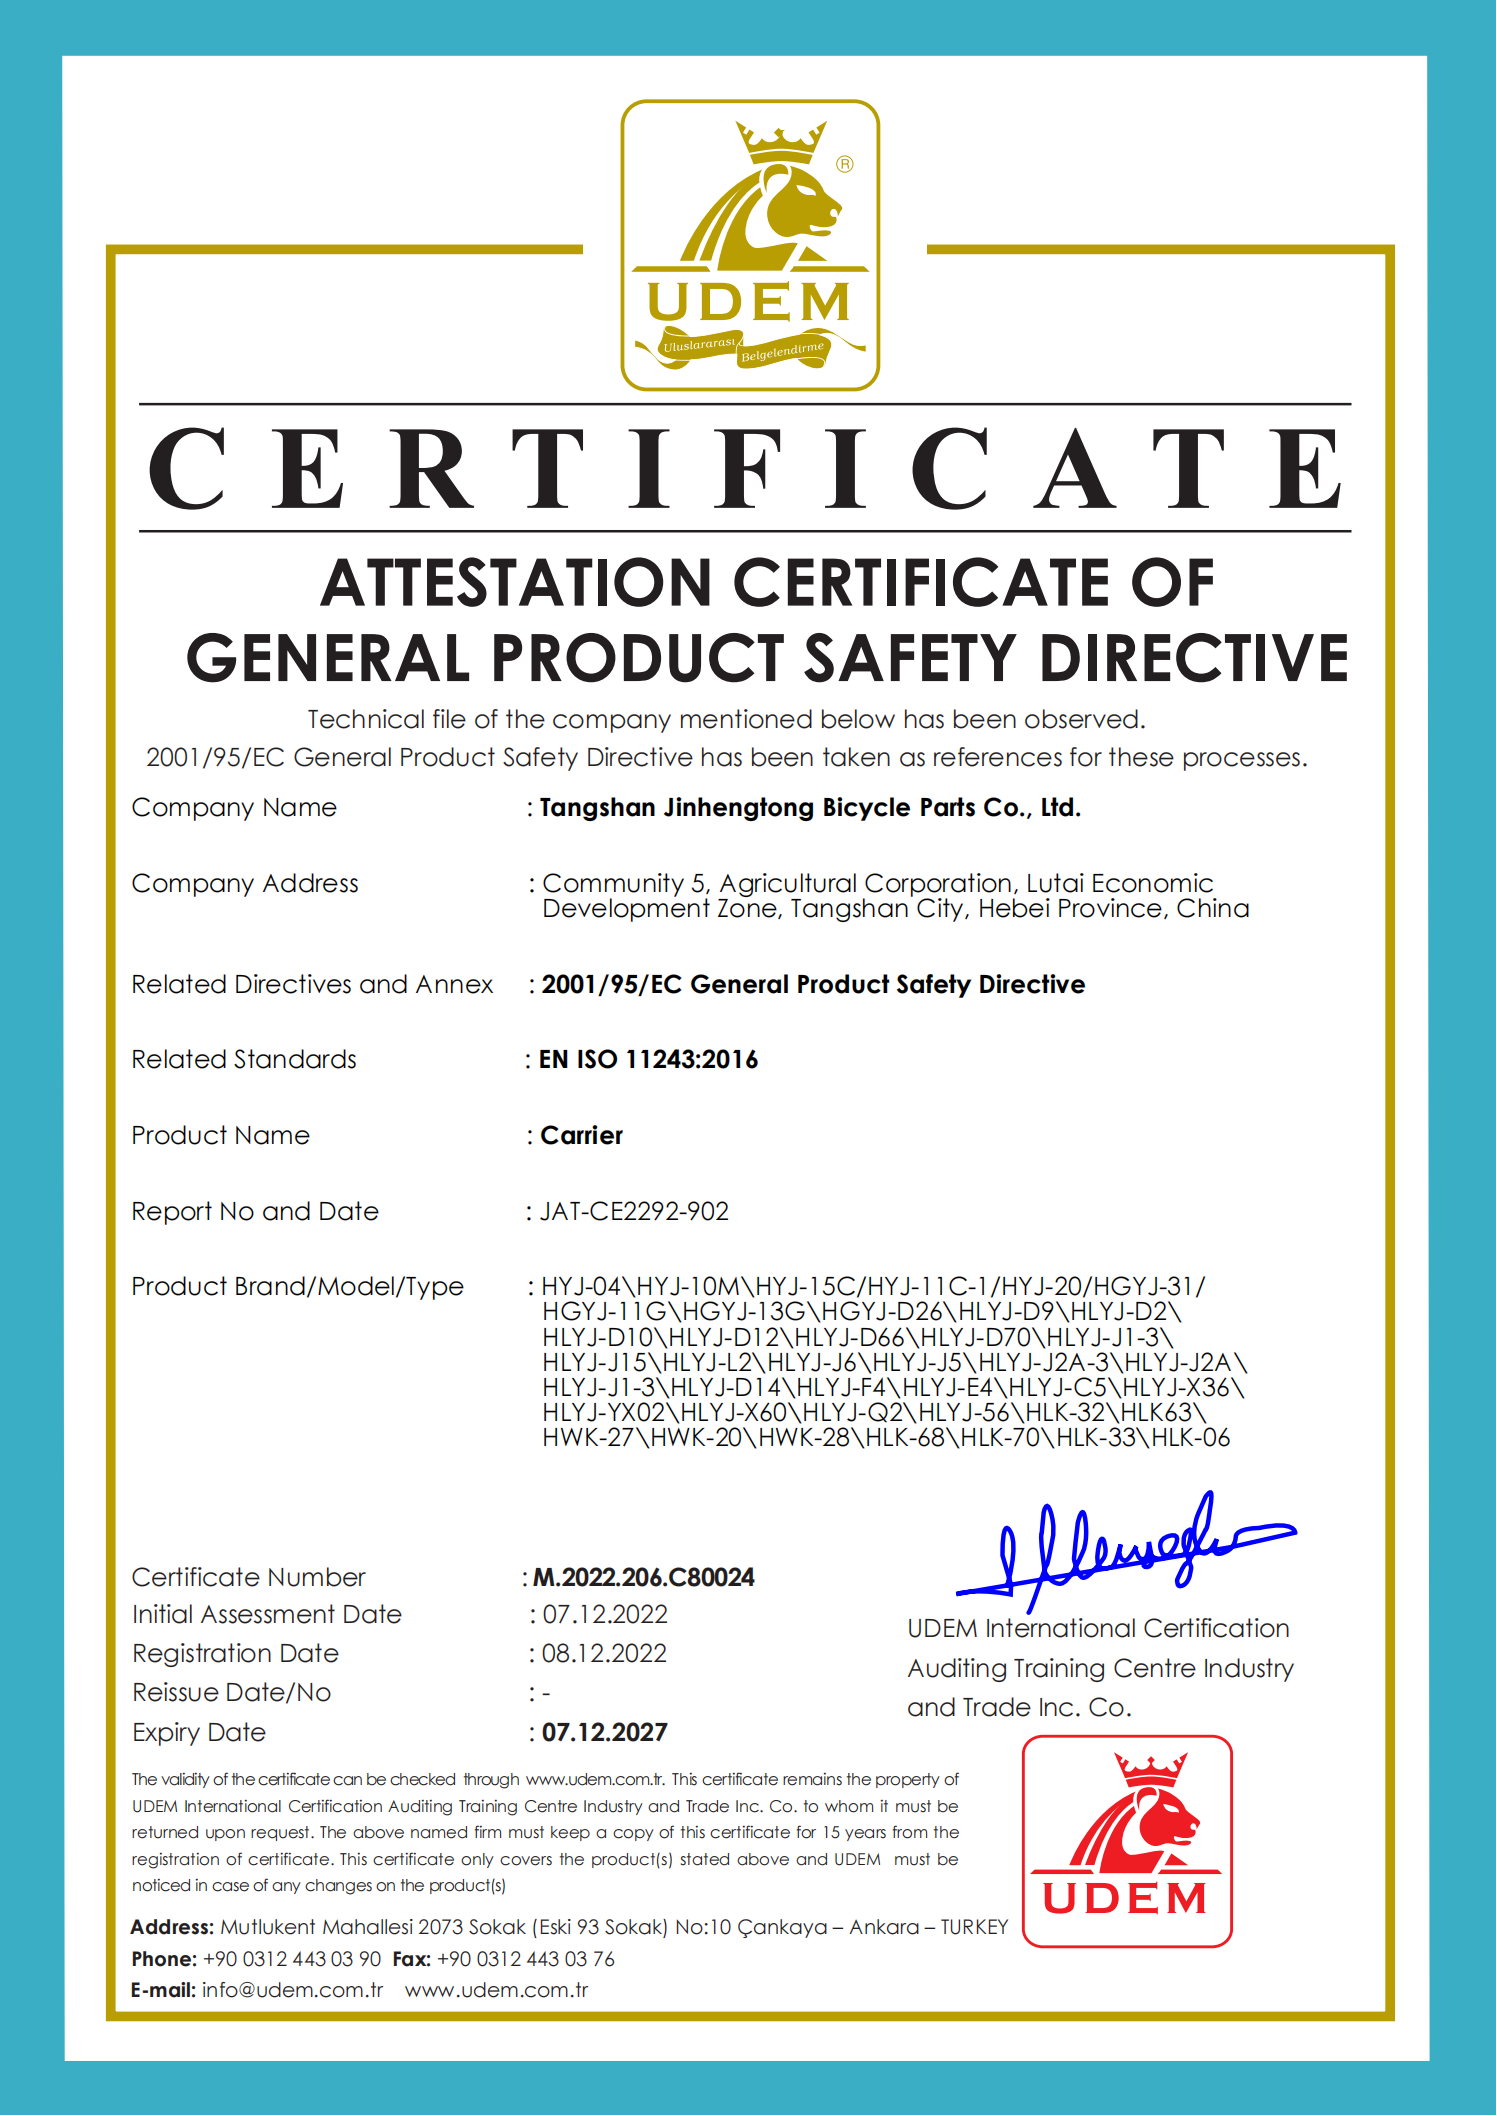 ATTESTATION CERTIFICATE OF GENERAL PRODUCT SAFETY DIRECTIVE